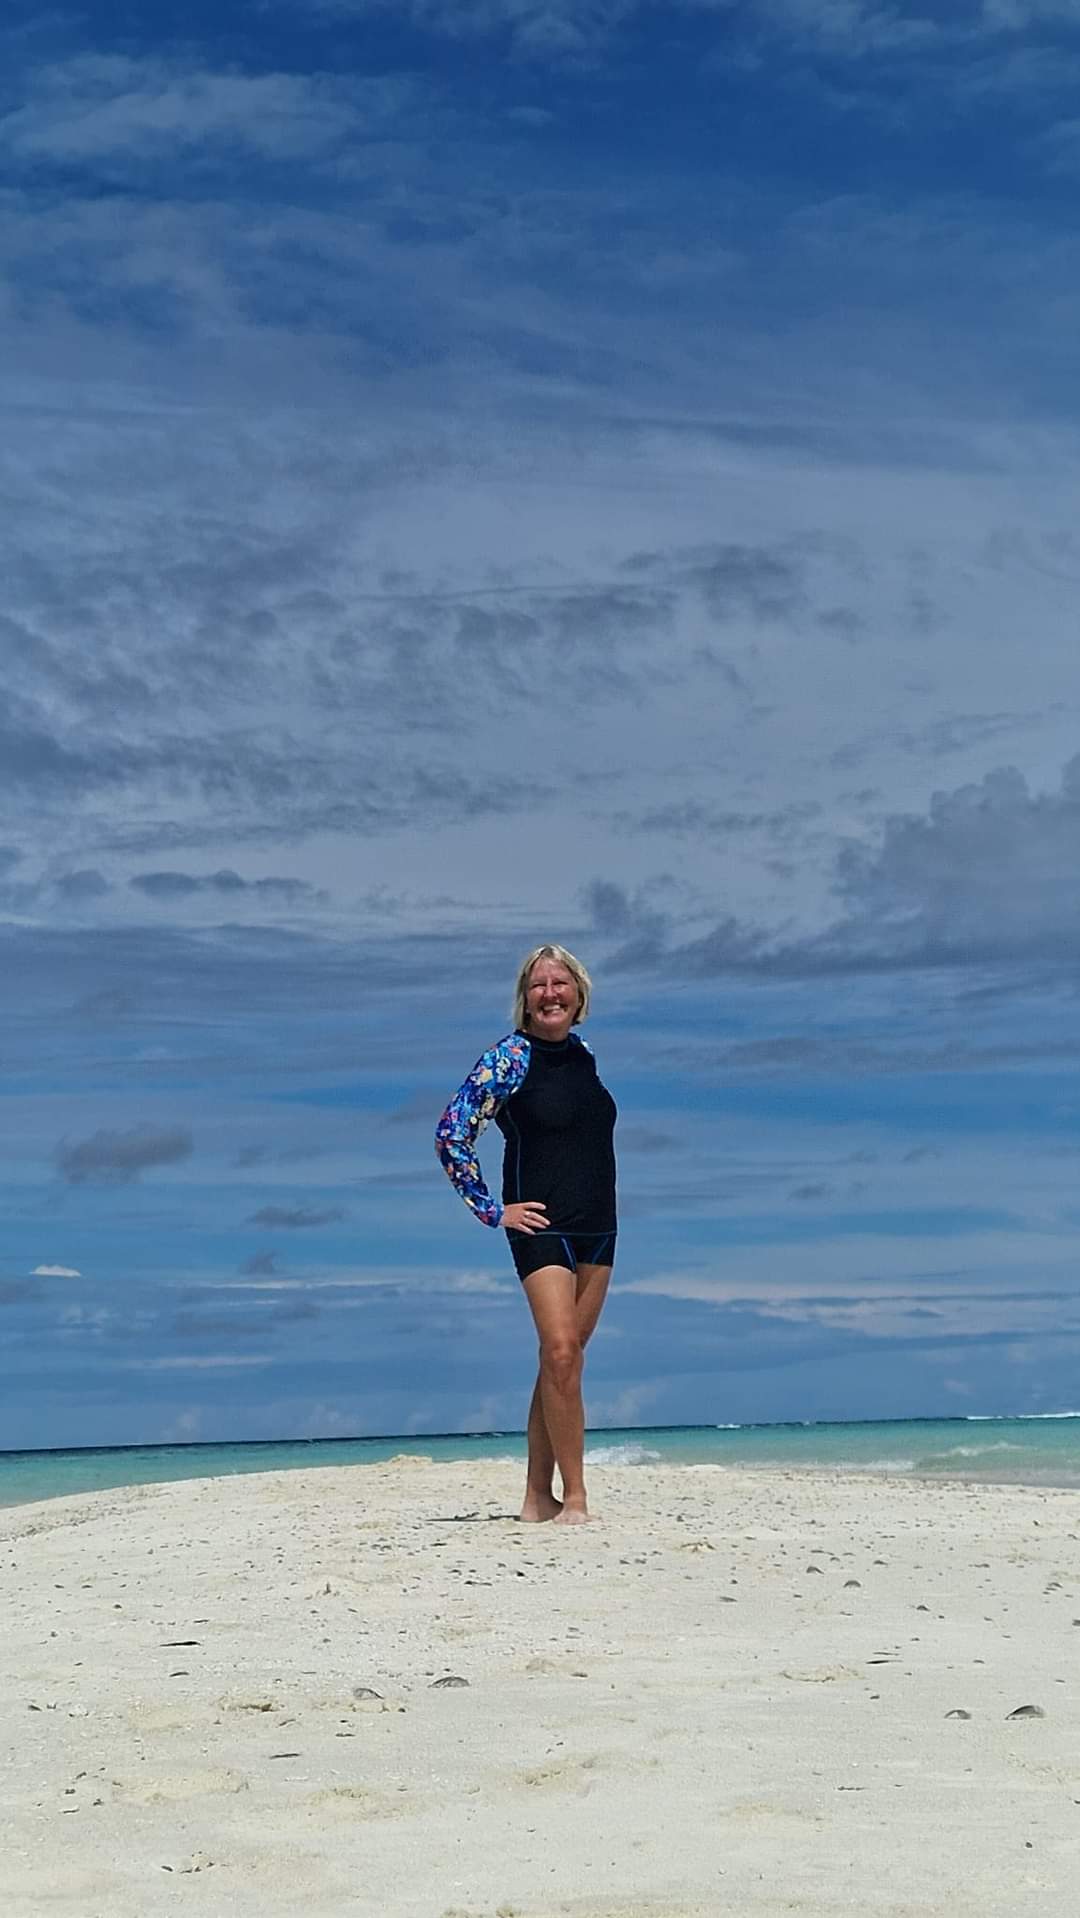 Me standing on a sandbank in the Indian Ocean